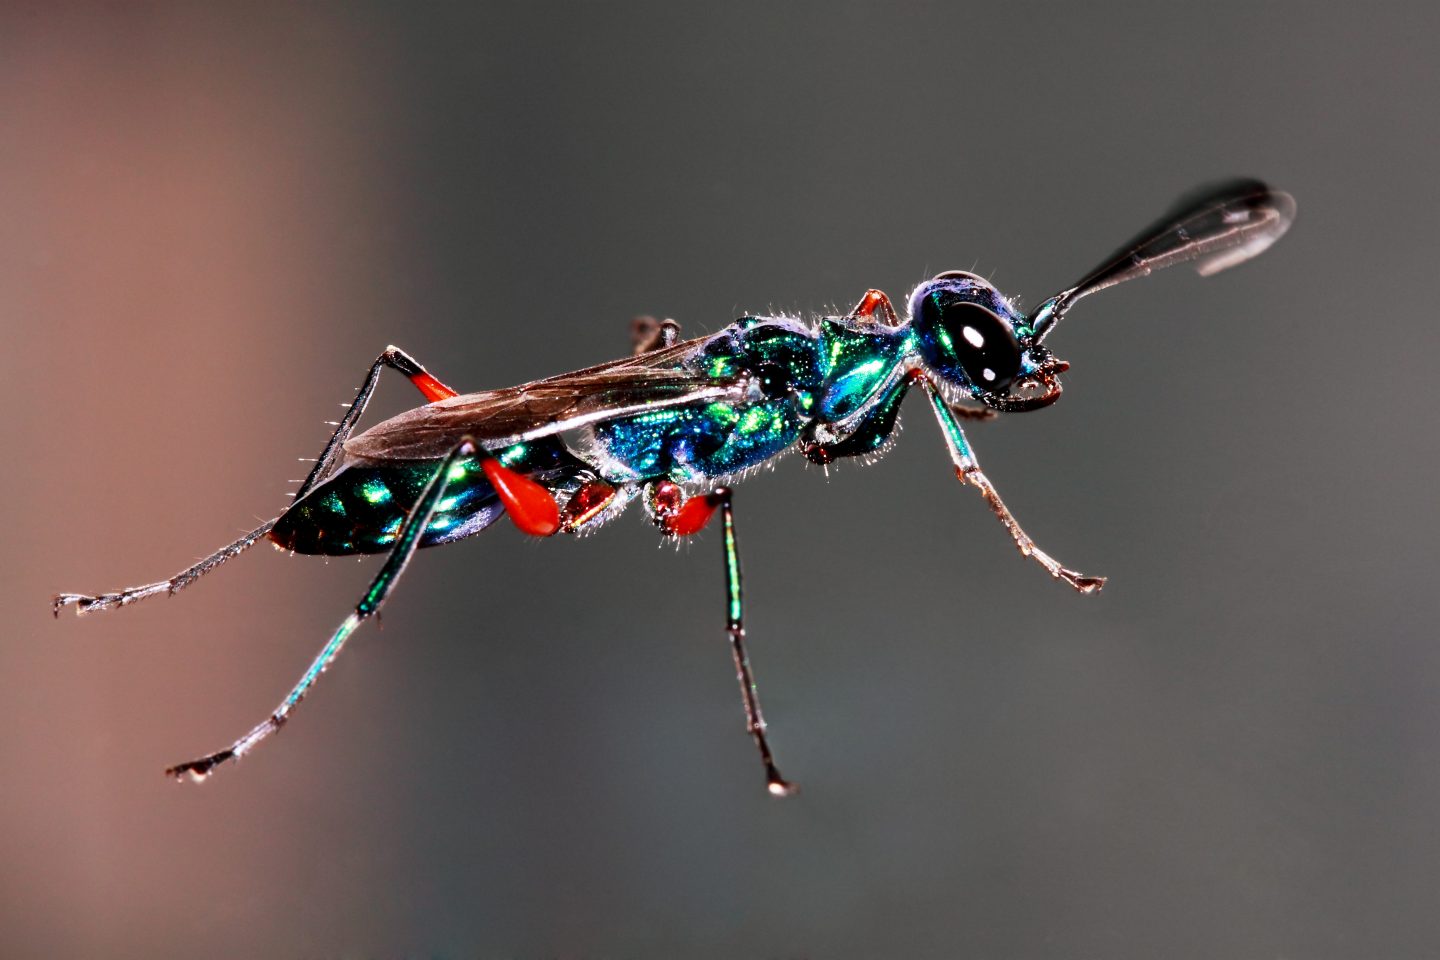 The emerald cockroach wasp: a true parasite